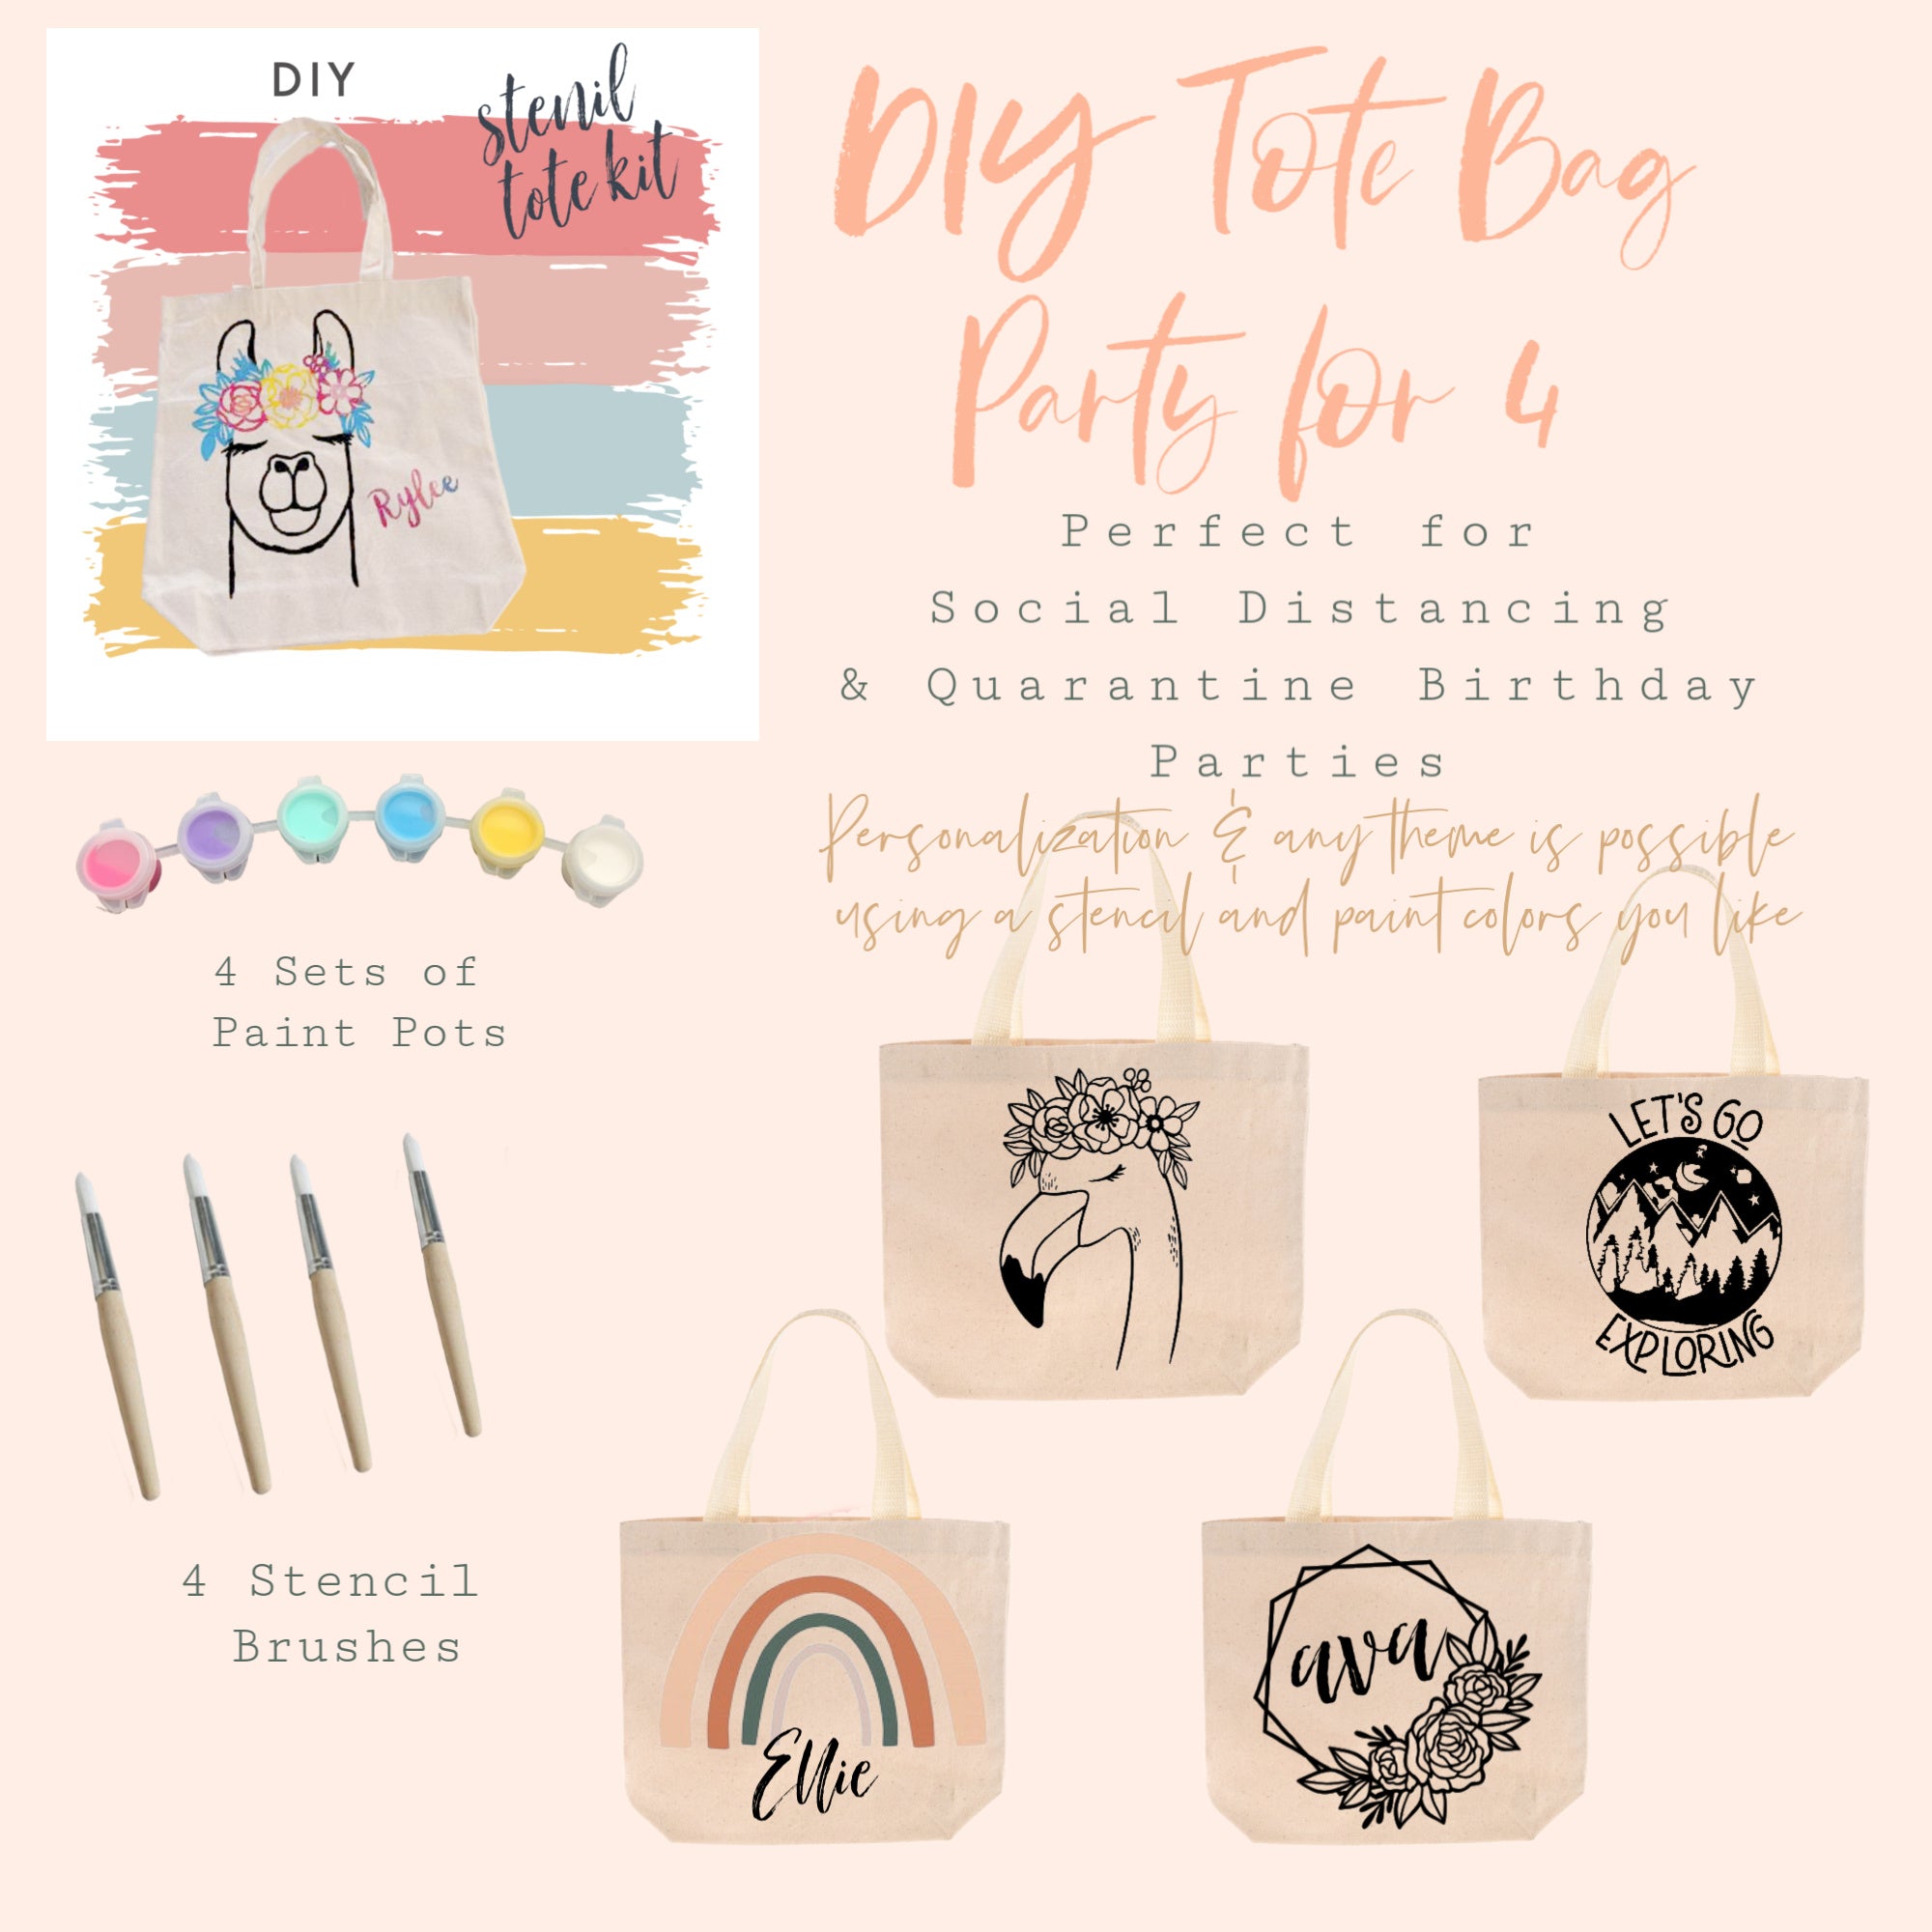 Party in a Box Craft Kit | Tote Bag Party for 4 | Natural Color